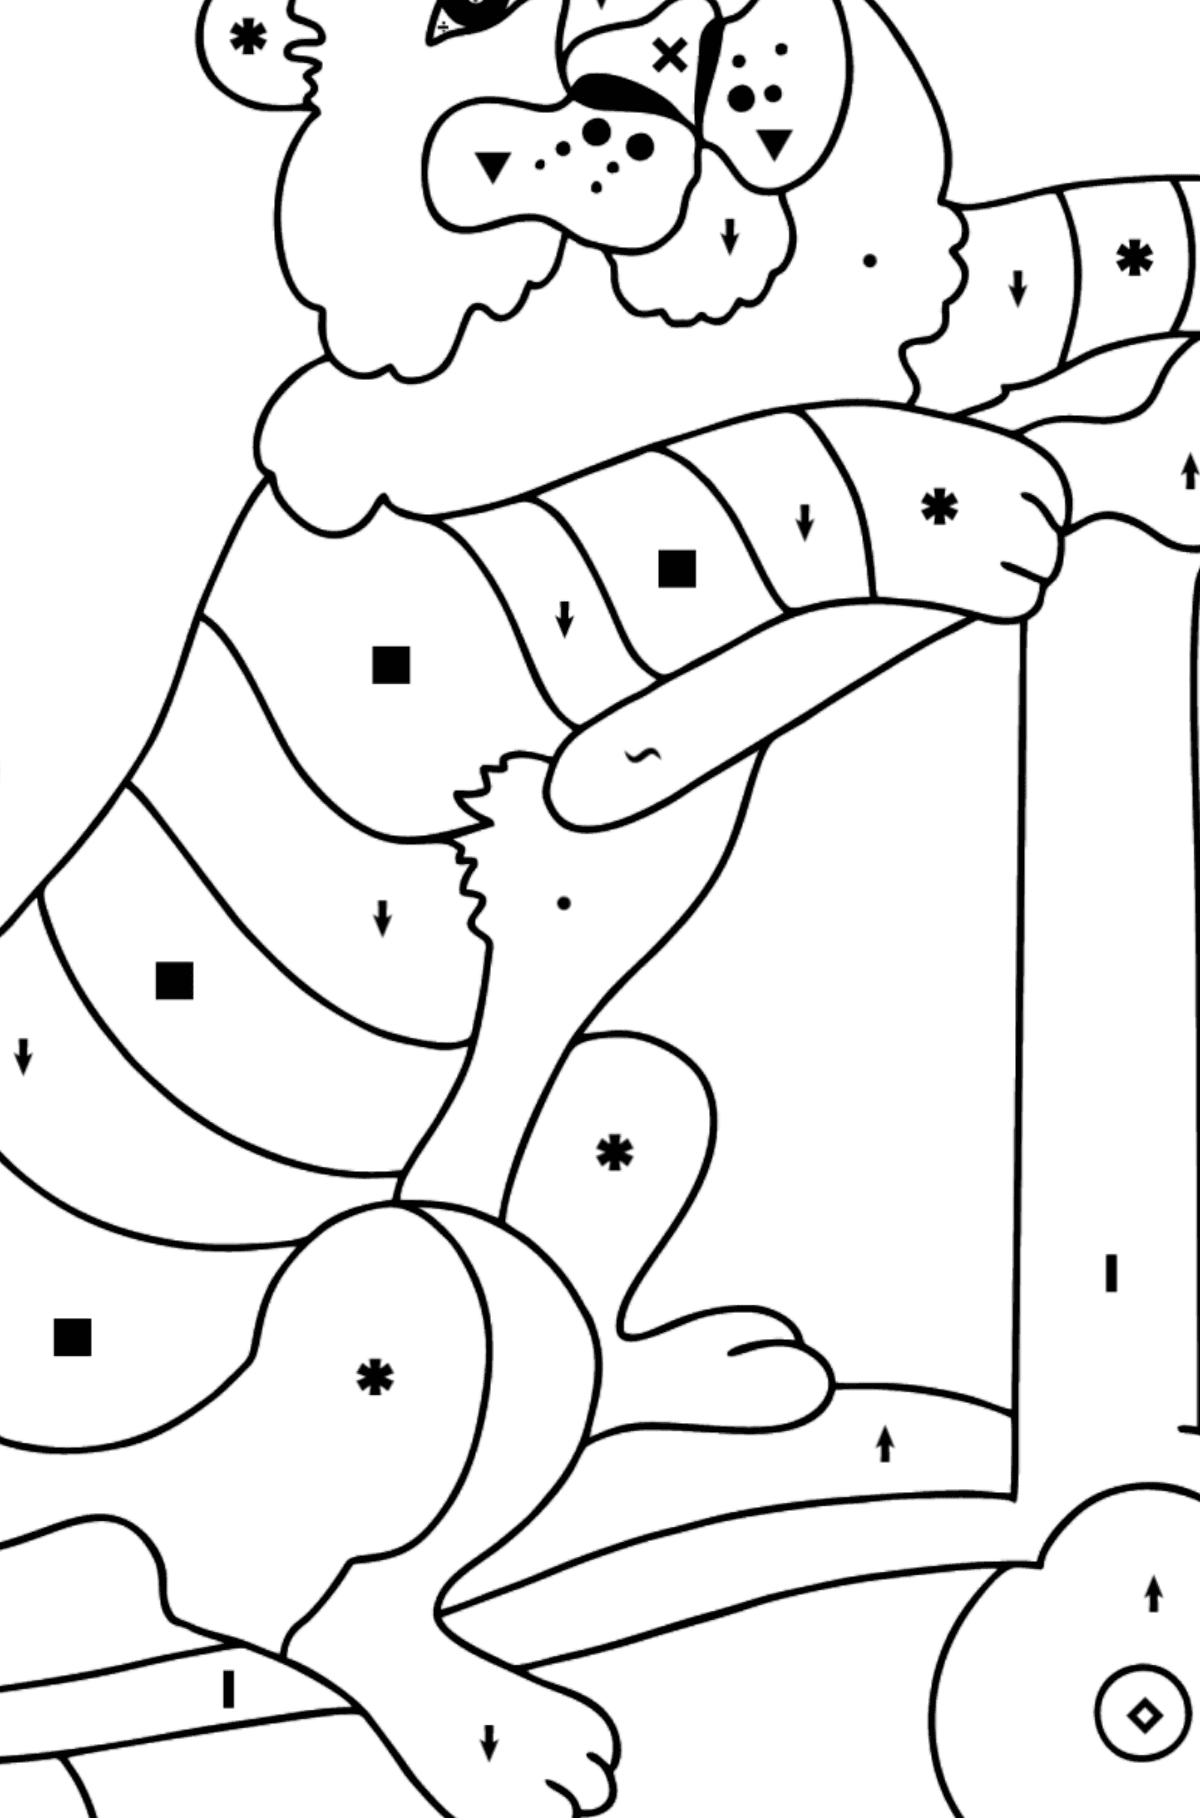 Coloring Page - A Tiger on a Fancy Scooter - Coloring by Symbols for Kids